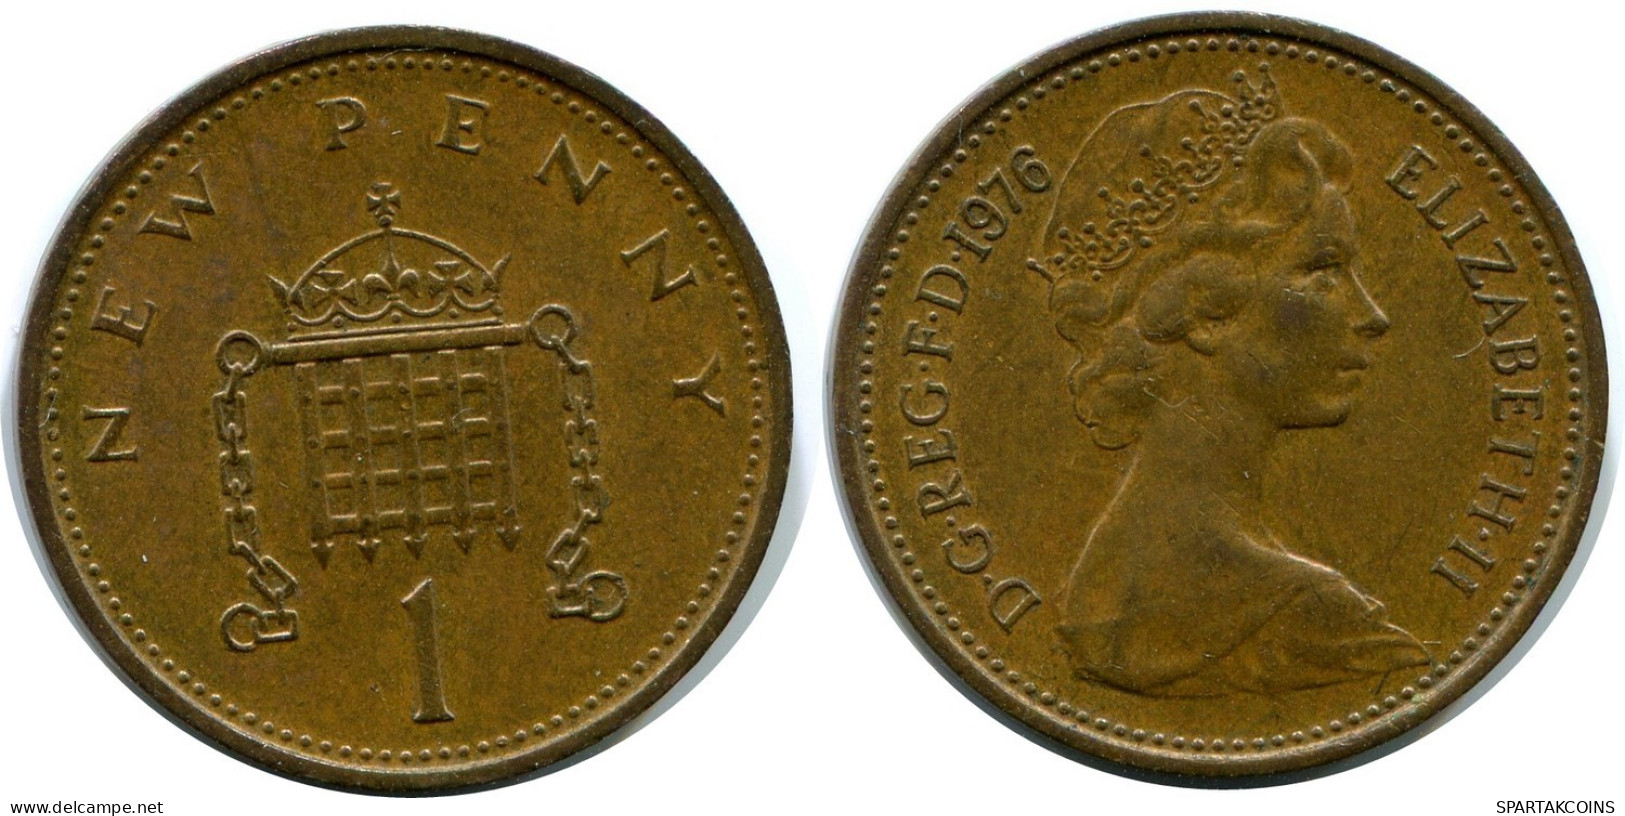 NEW PENNY 1976 UK GREAT BRITAIN Coin #AZ040.U.A - 1 Penny & 1 New Penny